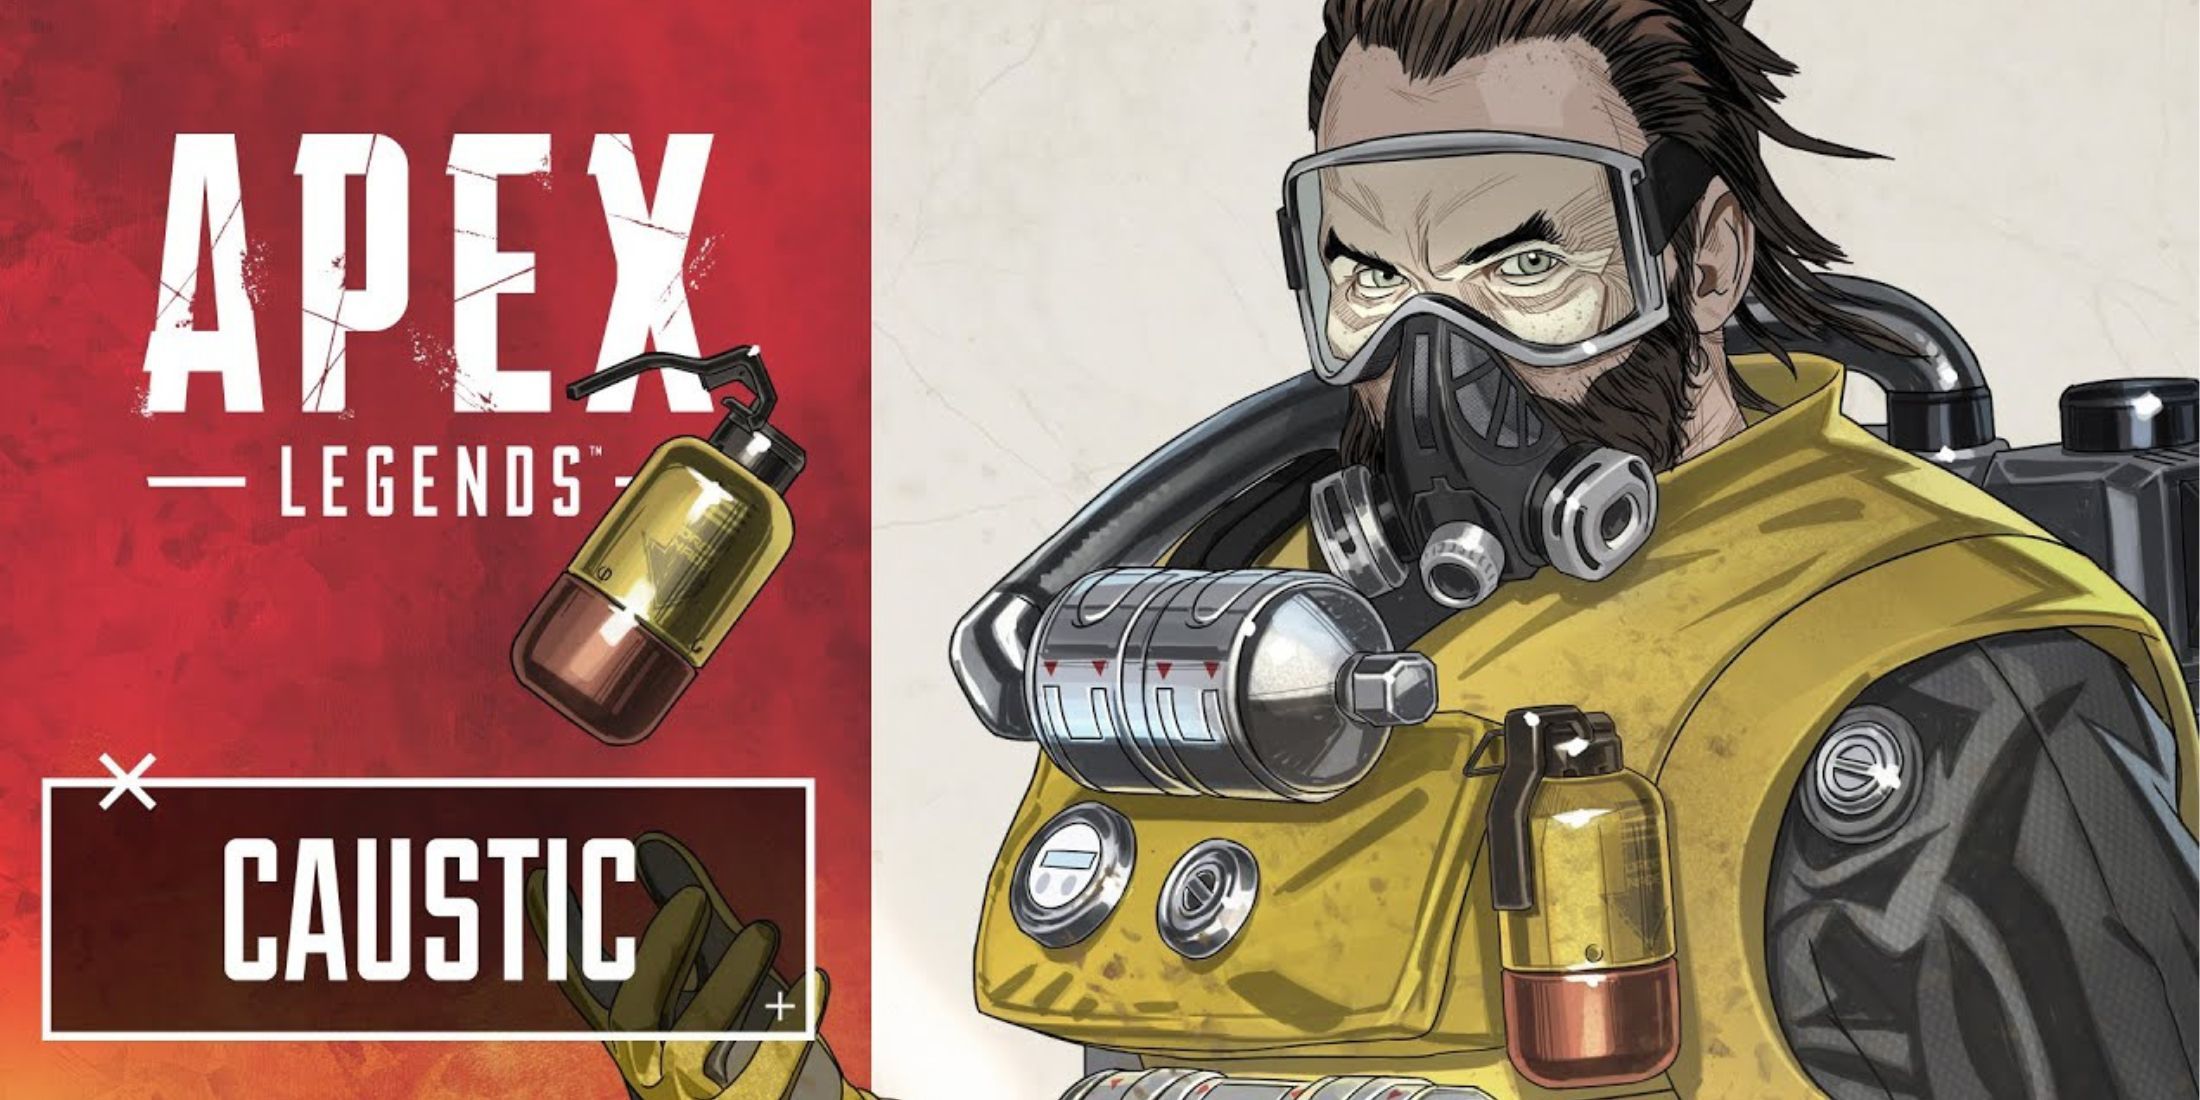 Caustic from Apex Legends